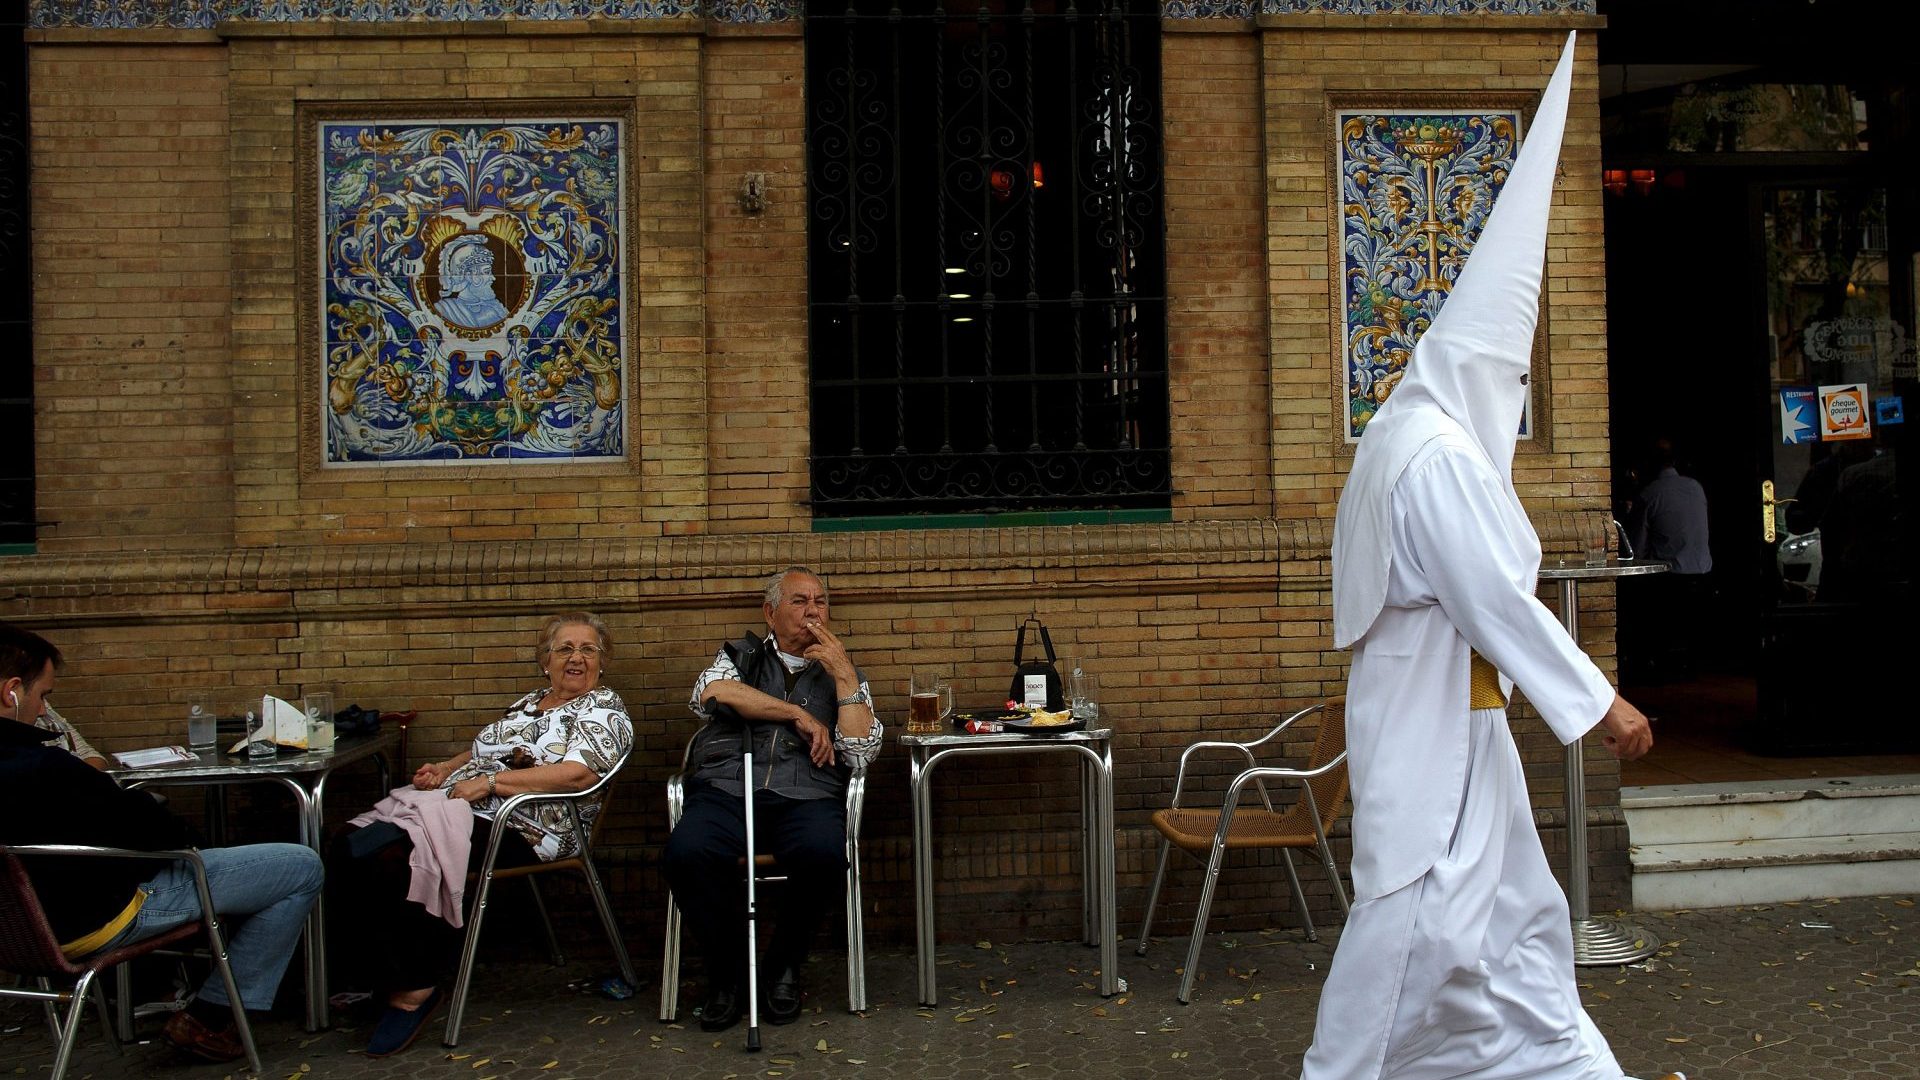 People having tapas outside a bar in Seville are passed by a penitent from the San Gonzalo brotherhood who walks to the church for a procession during Easter week. Photo: Pablo Blázquez Domínguez